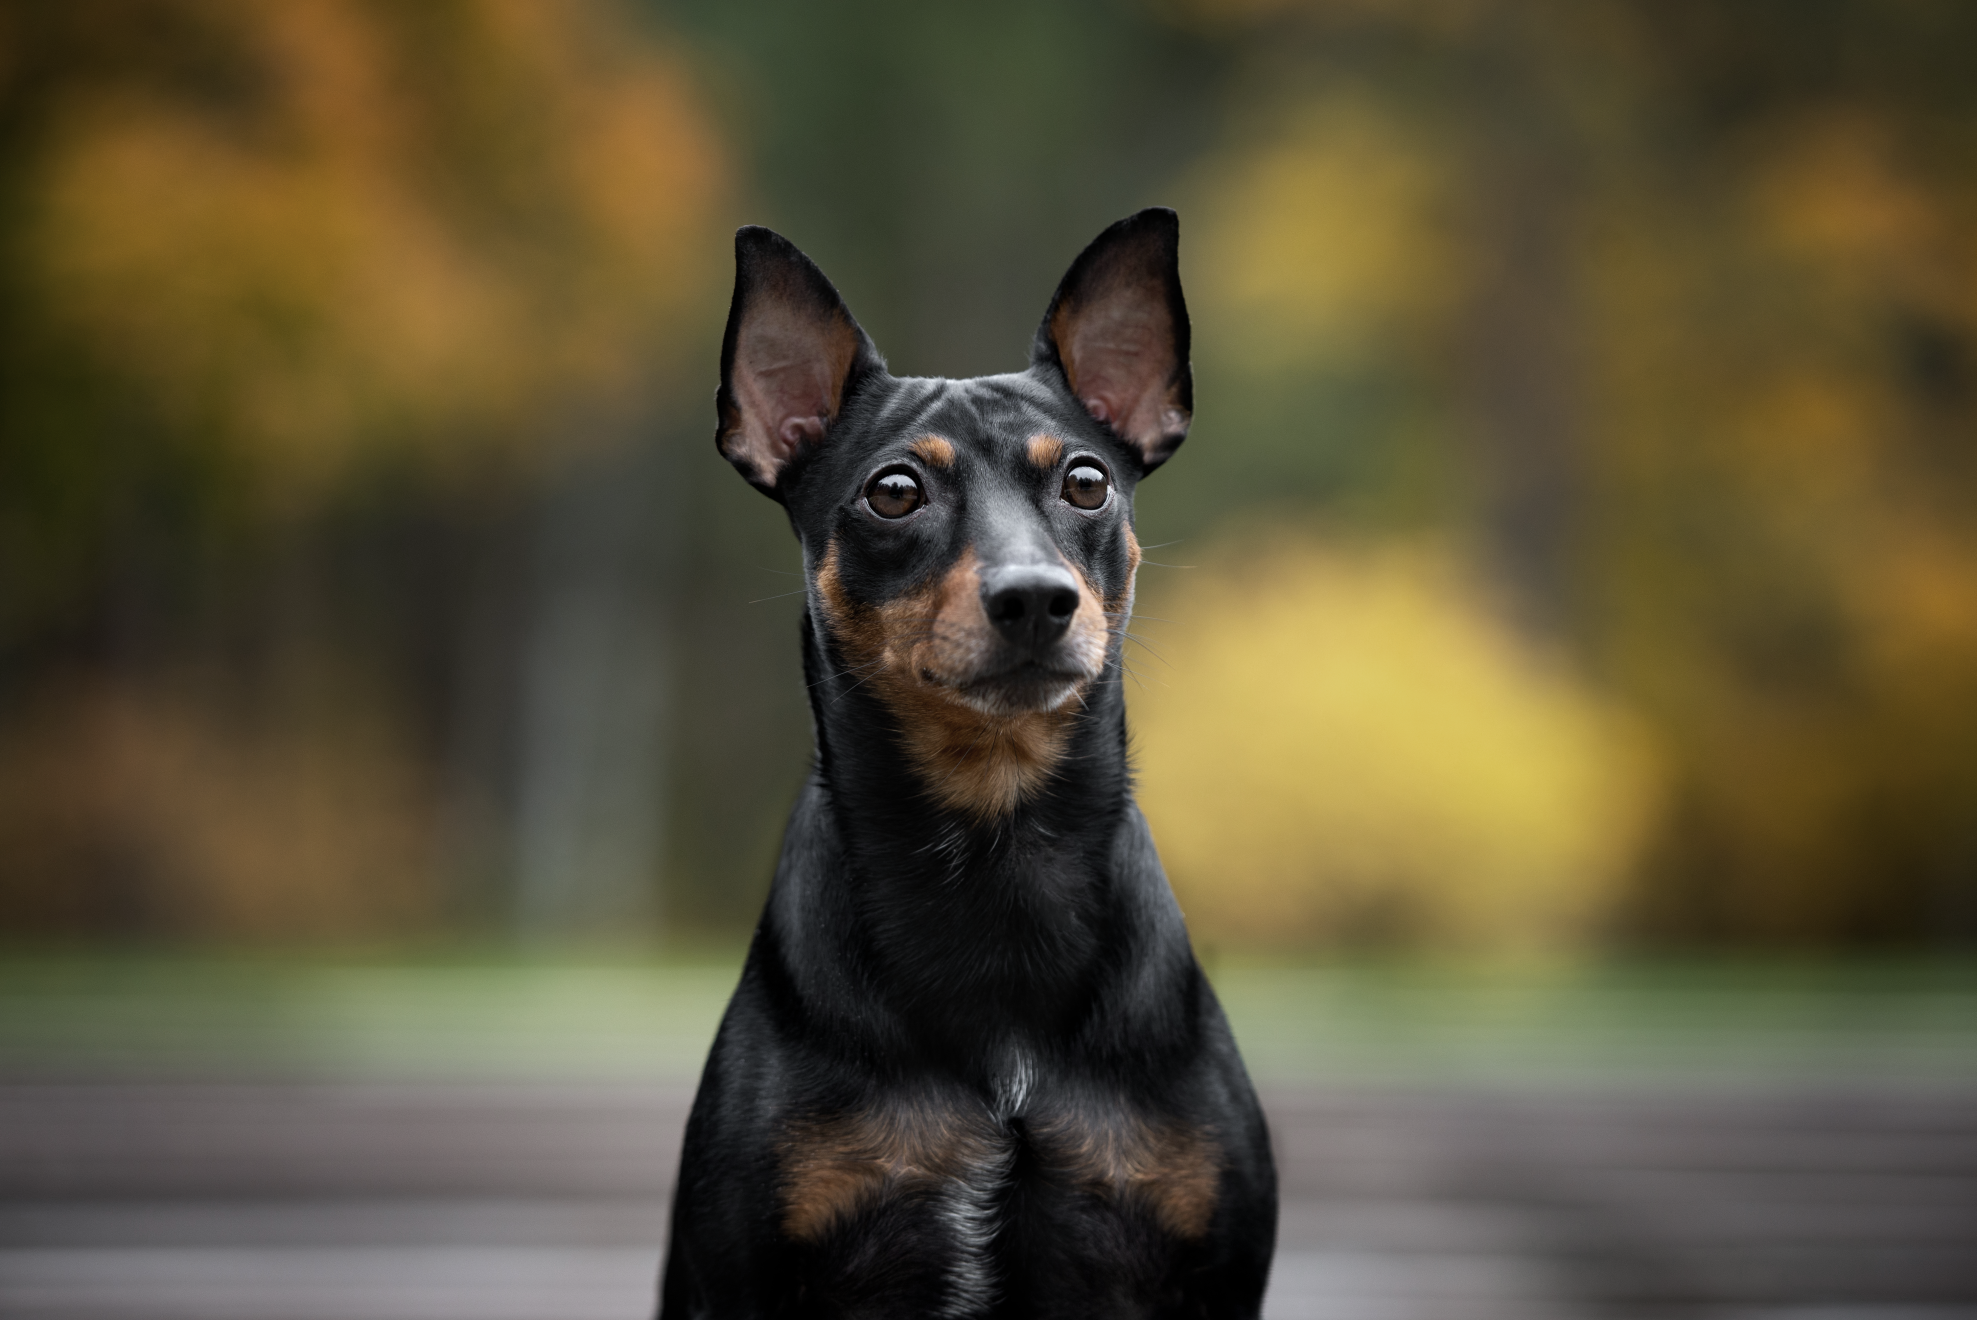 Black German Pinscher sat with a focused look